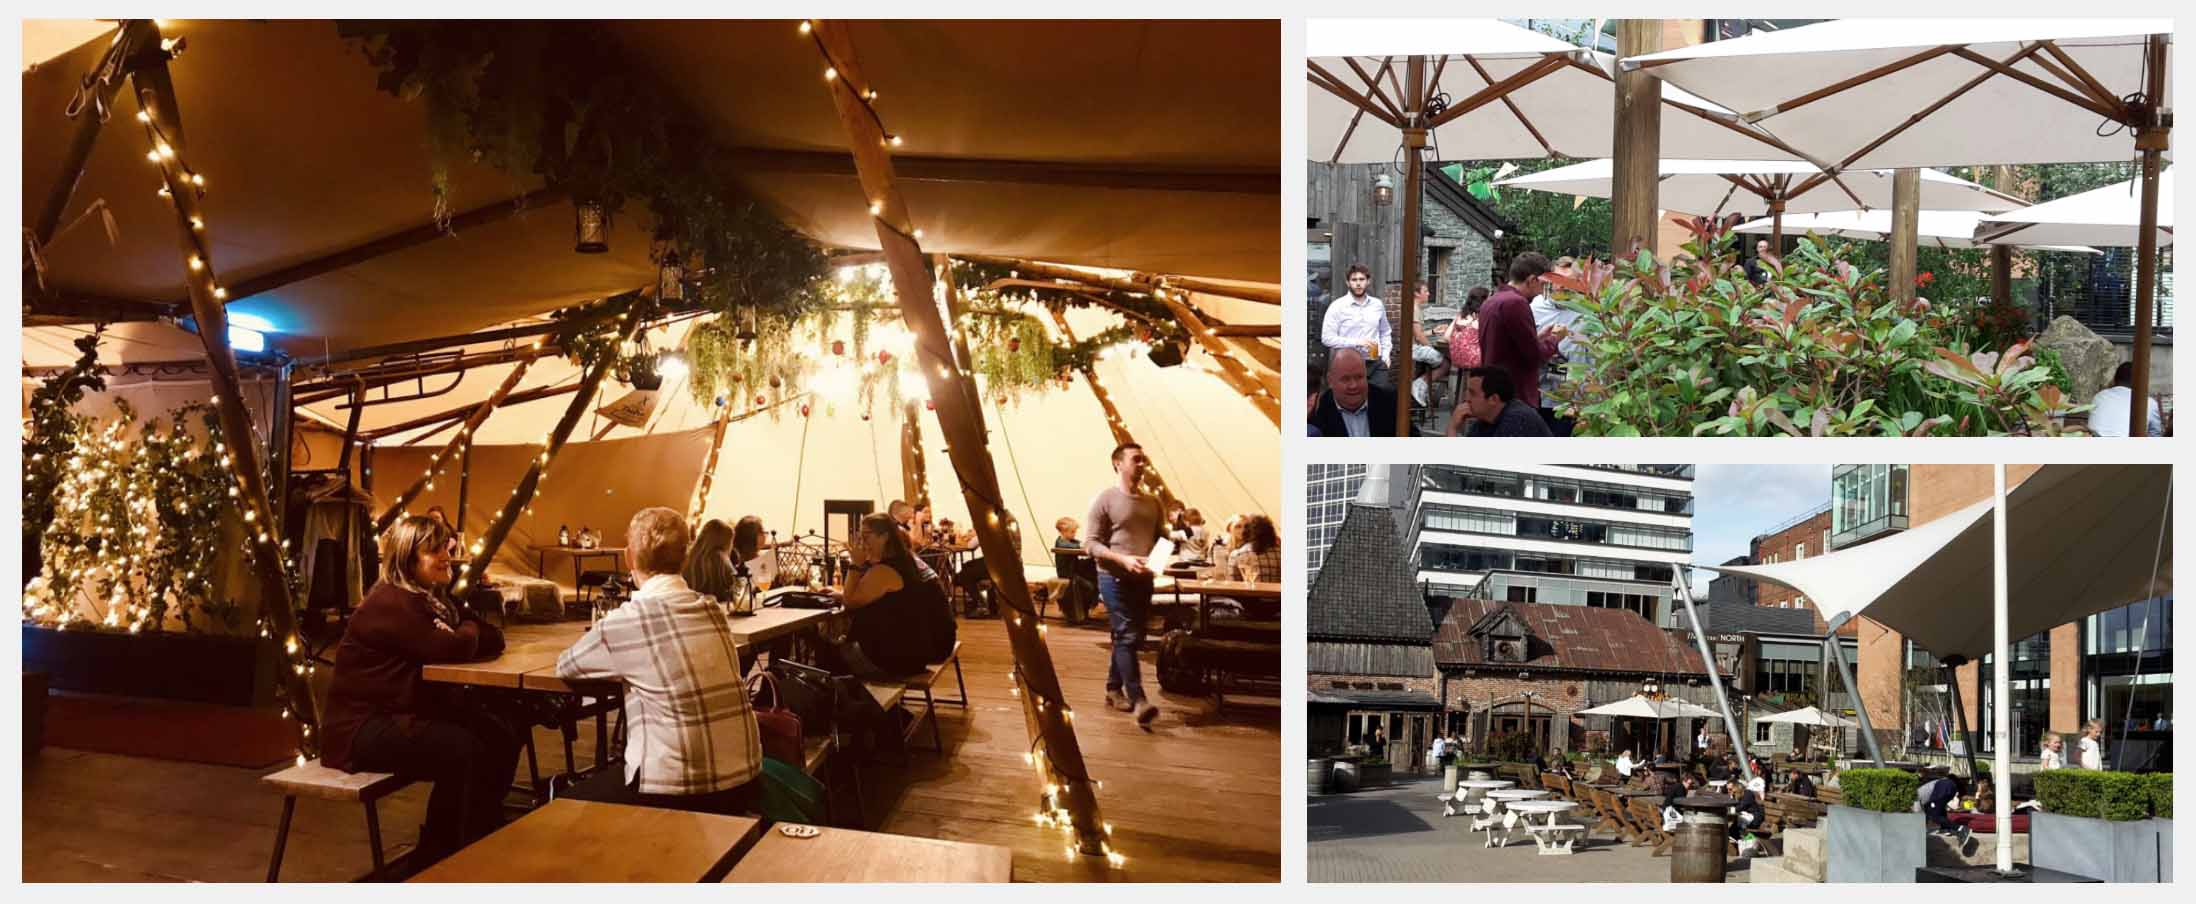 Best Beer Gardens in Manchester - The Oast House